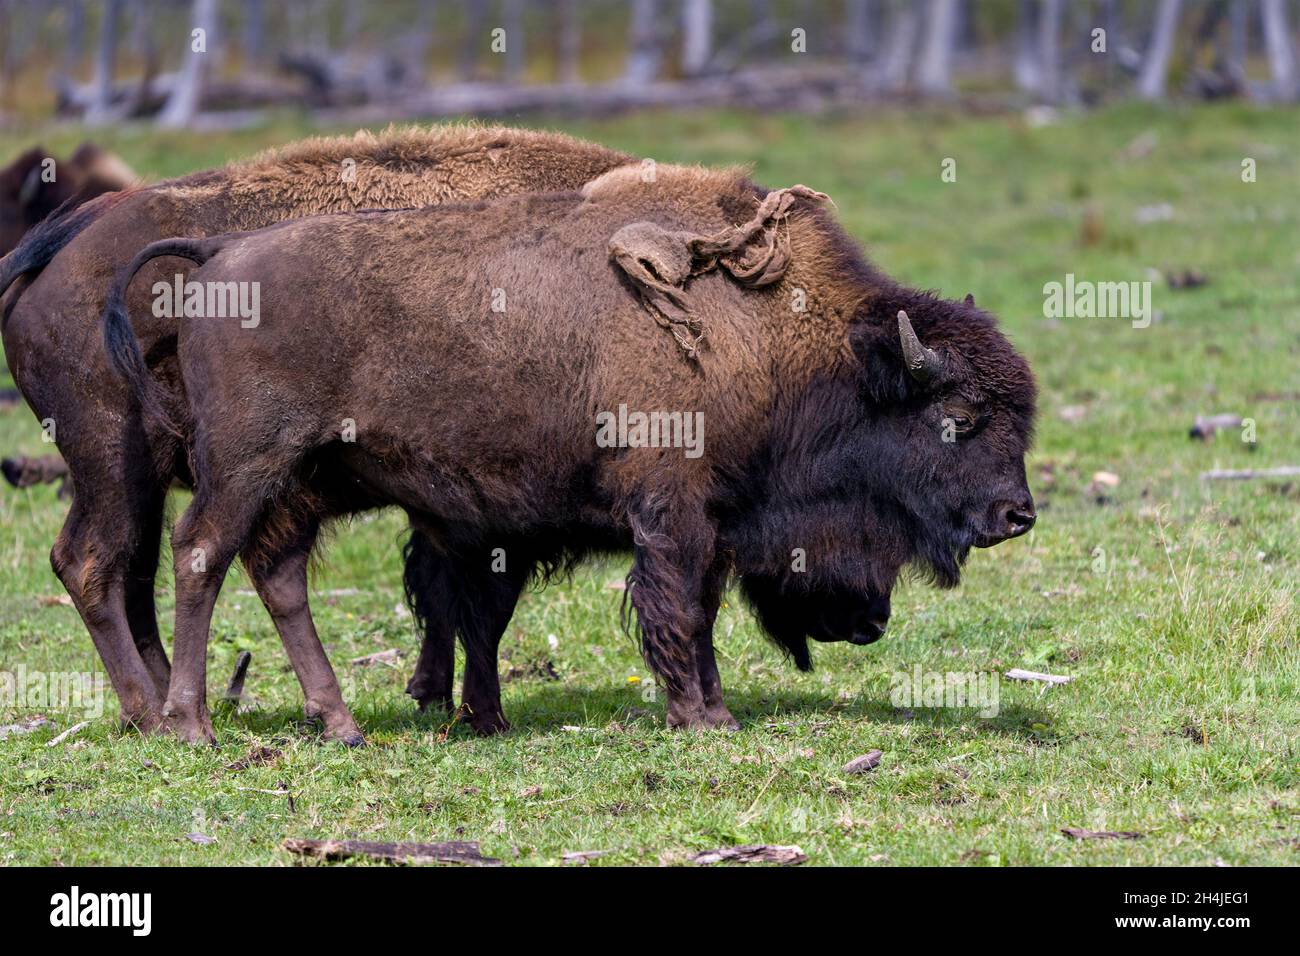 Bison close-up profile view in the field with grass blur background in their environment and surrounding habitat and displaying their horns. Buffalo Stock Photo